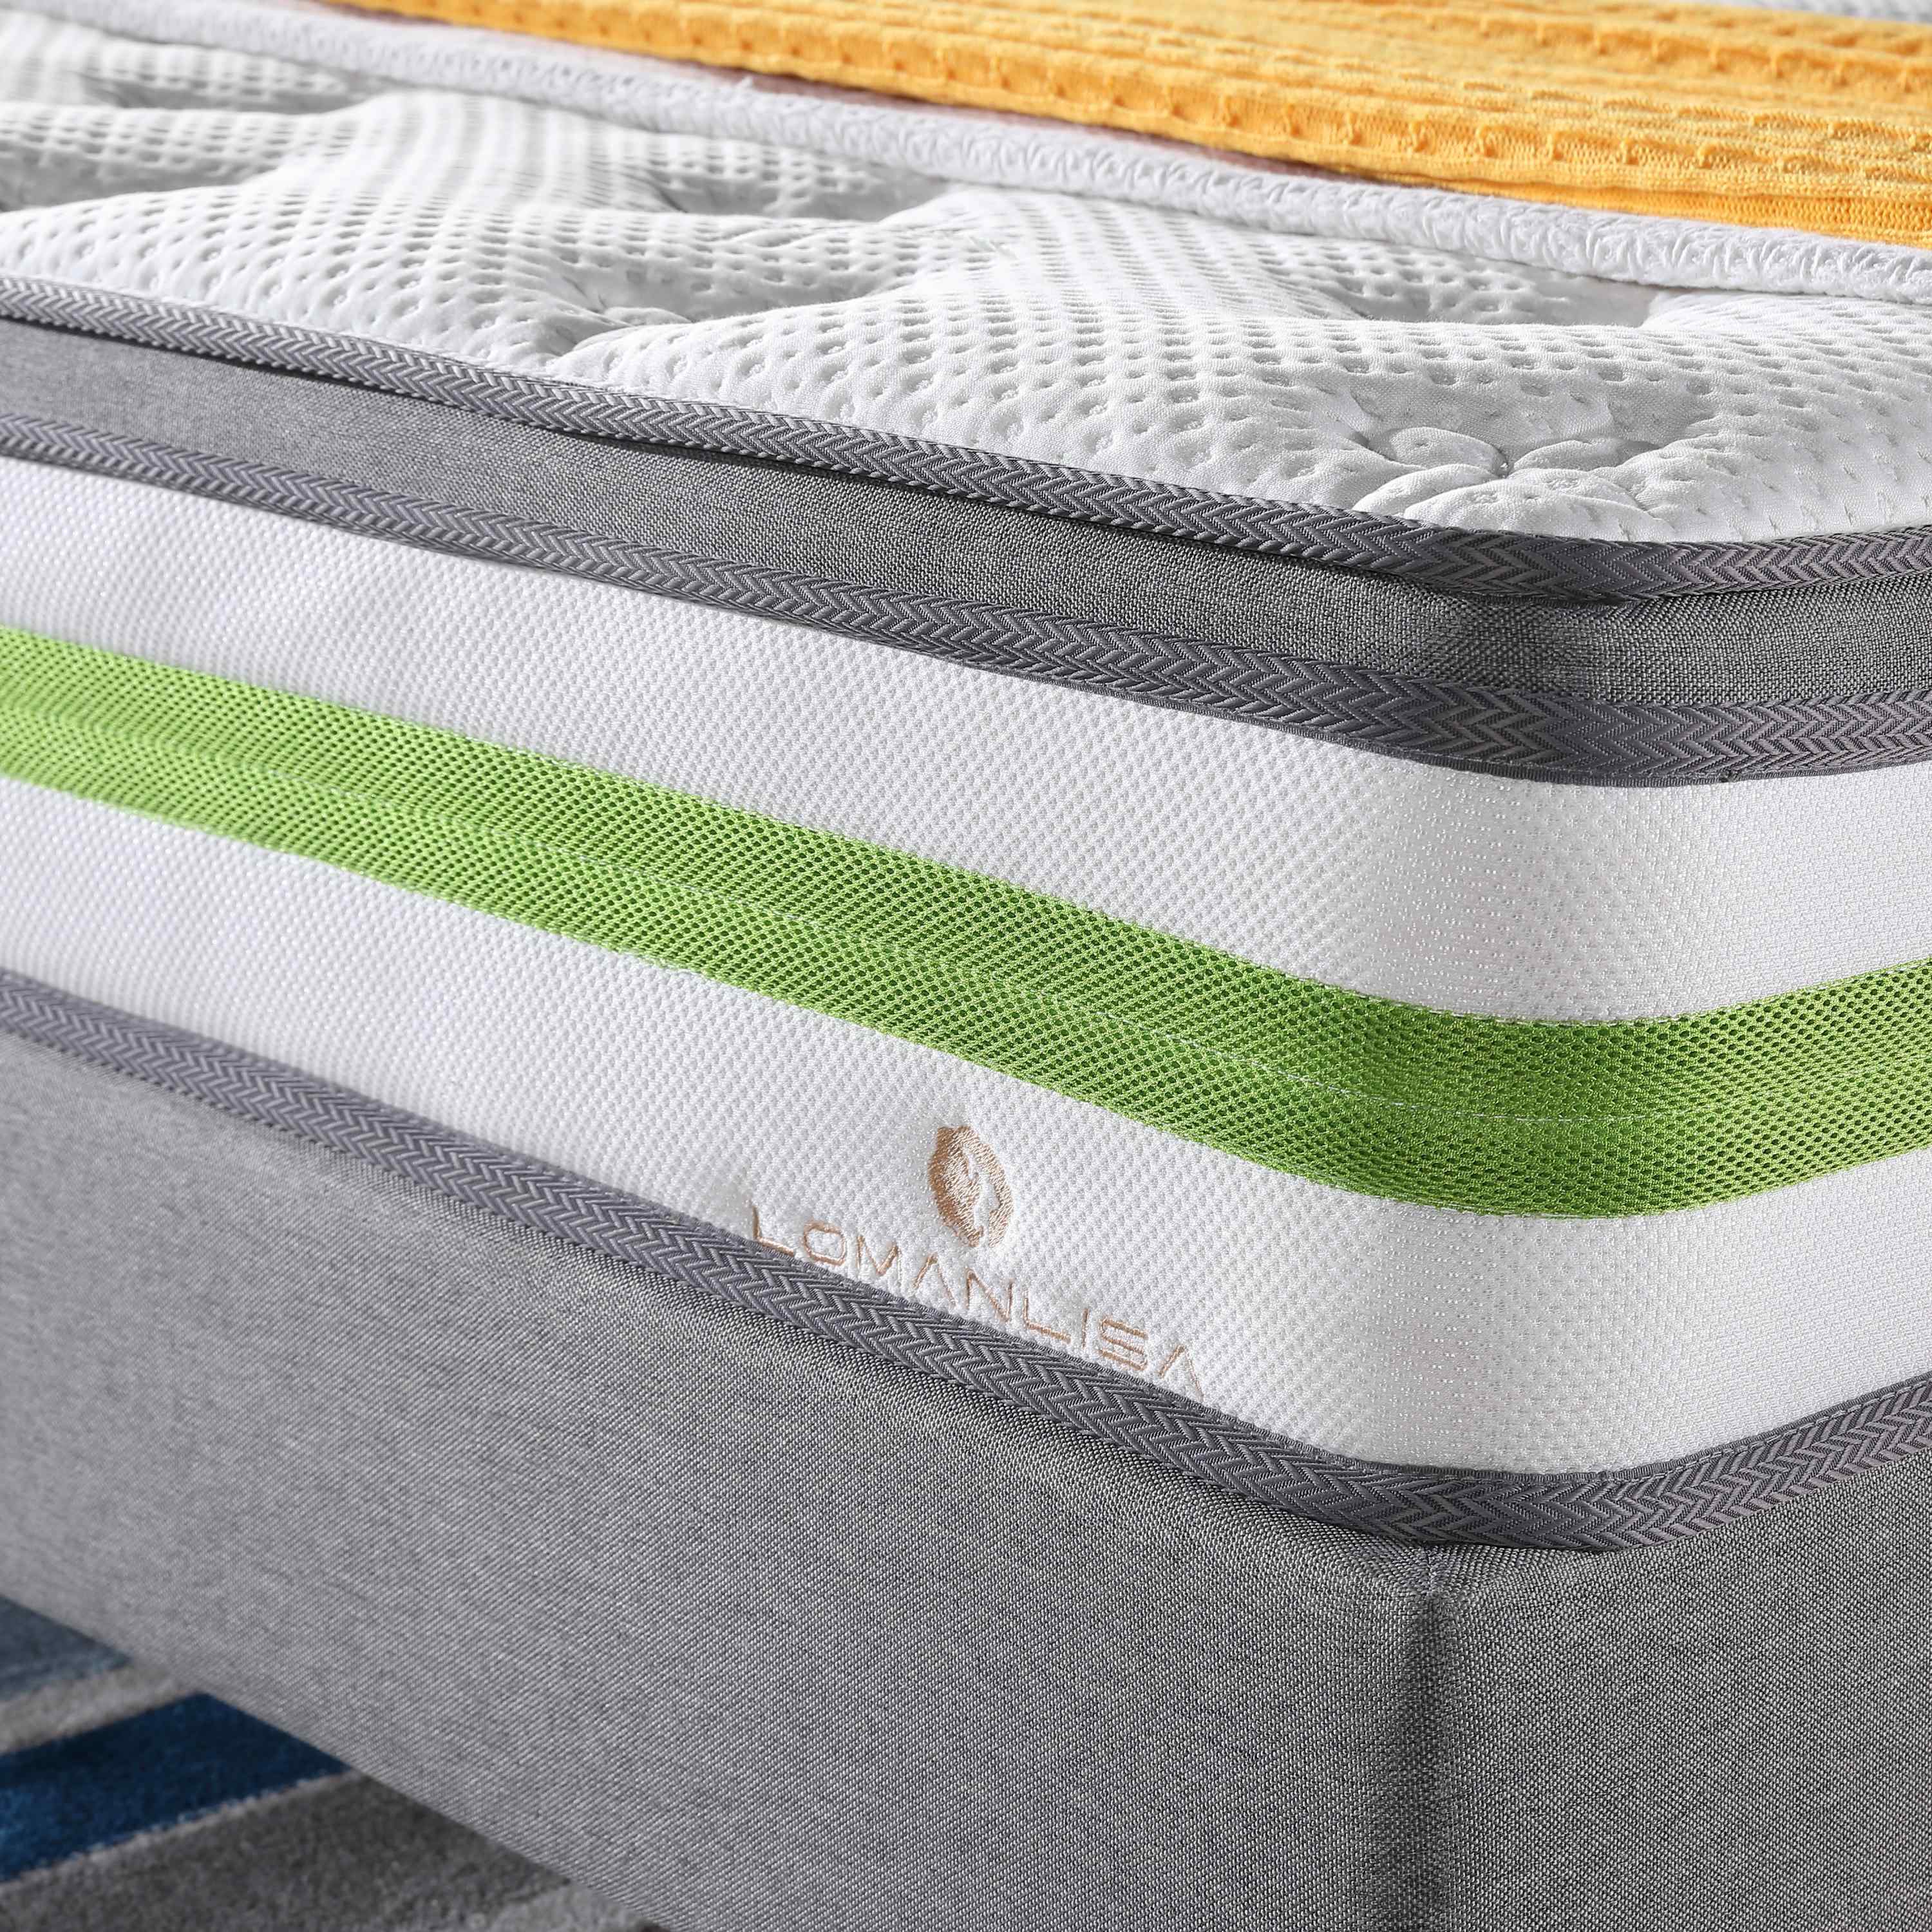 JLH Euro Top Design Cooling Bamboo Fabric Anti-Mite Mattress with Convoluted Foam Best value mattress image1